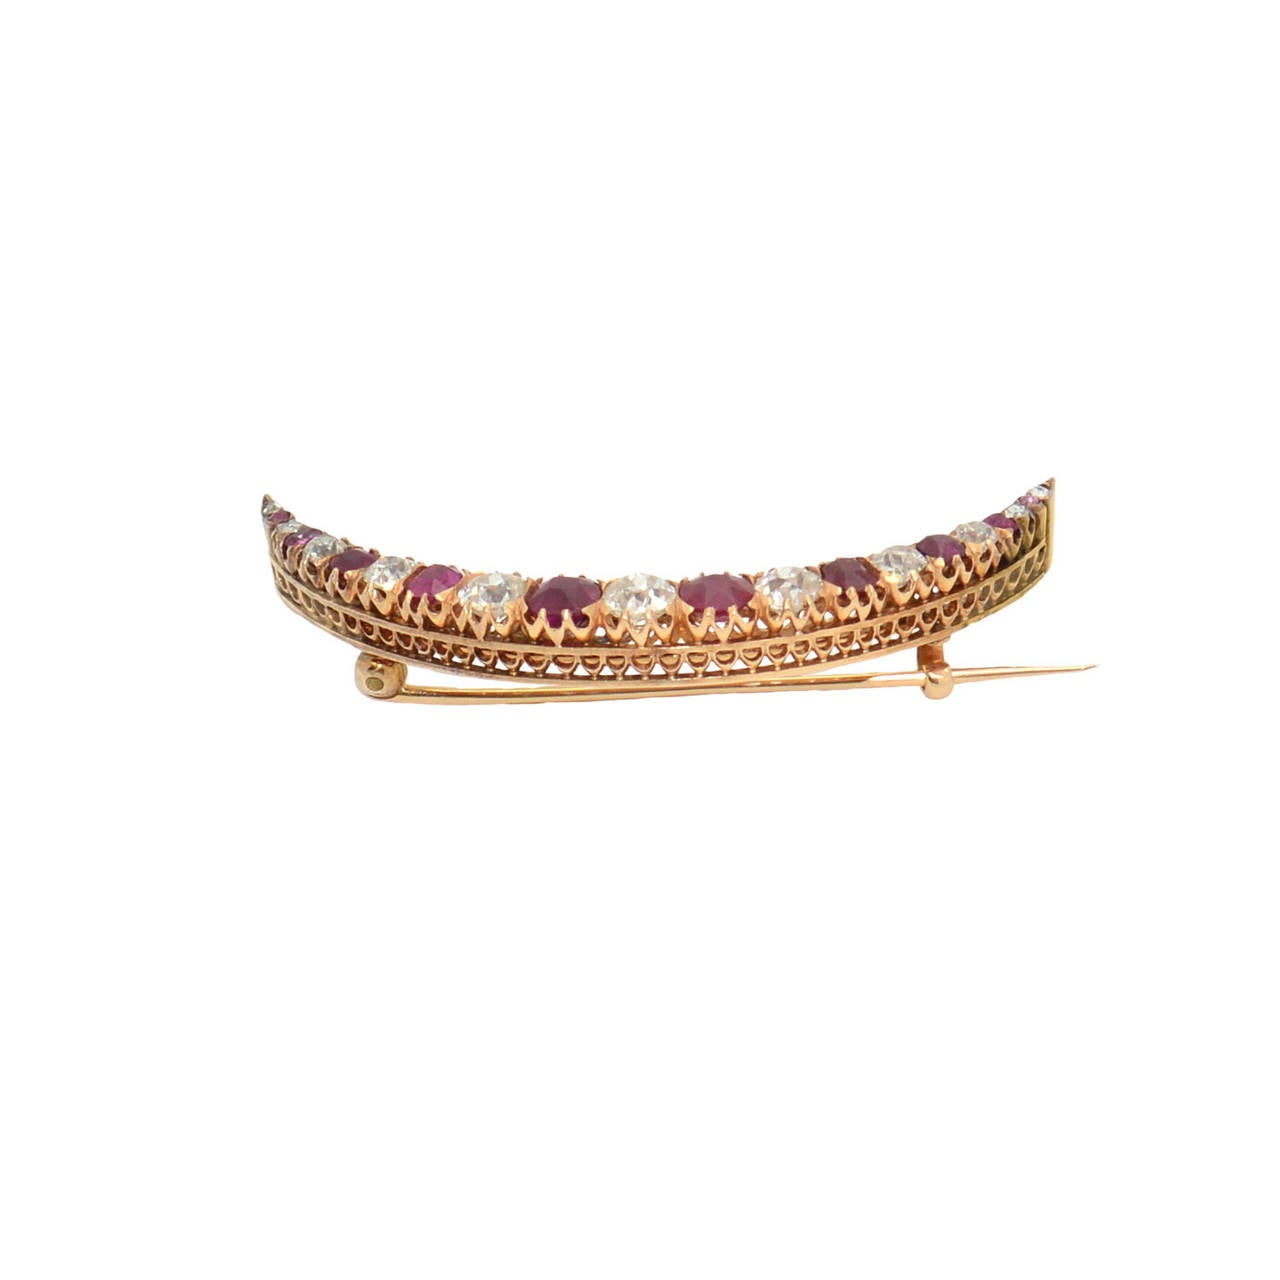 The half moon ruby, diamond and rose gold brooch with antique cut diamonds with a total weight of circa 2.50 carats and rubies with a total weight of circa 3.00 carats. Length circa 5.5 cm and width circa 0.7 cm. Gold weight 9 g. Splendid handcraft